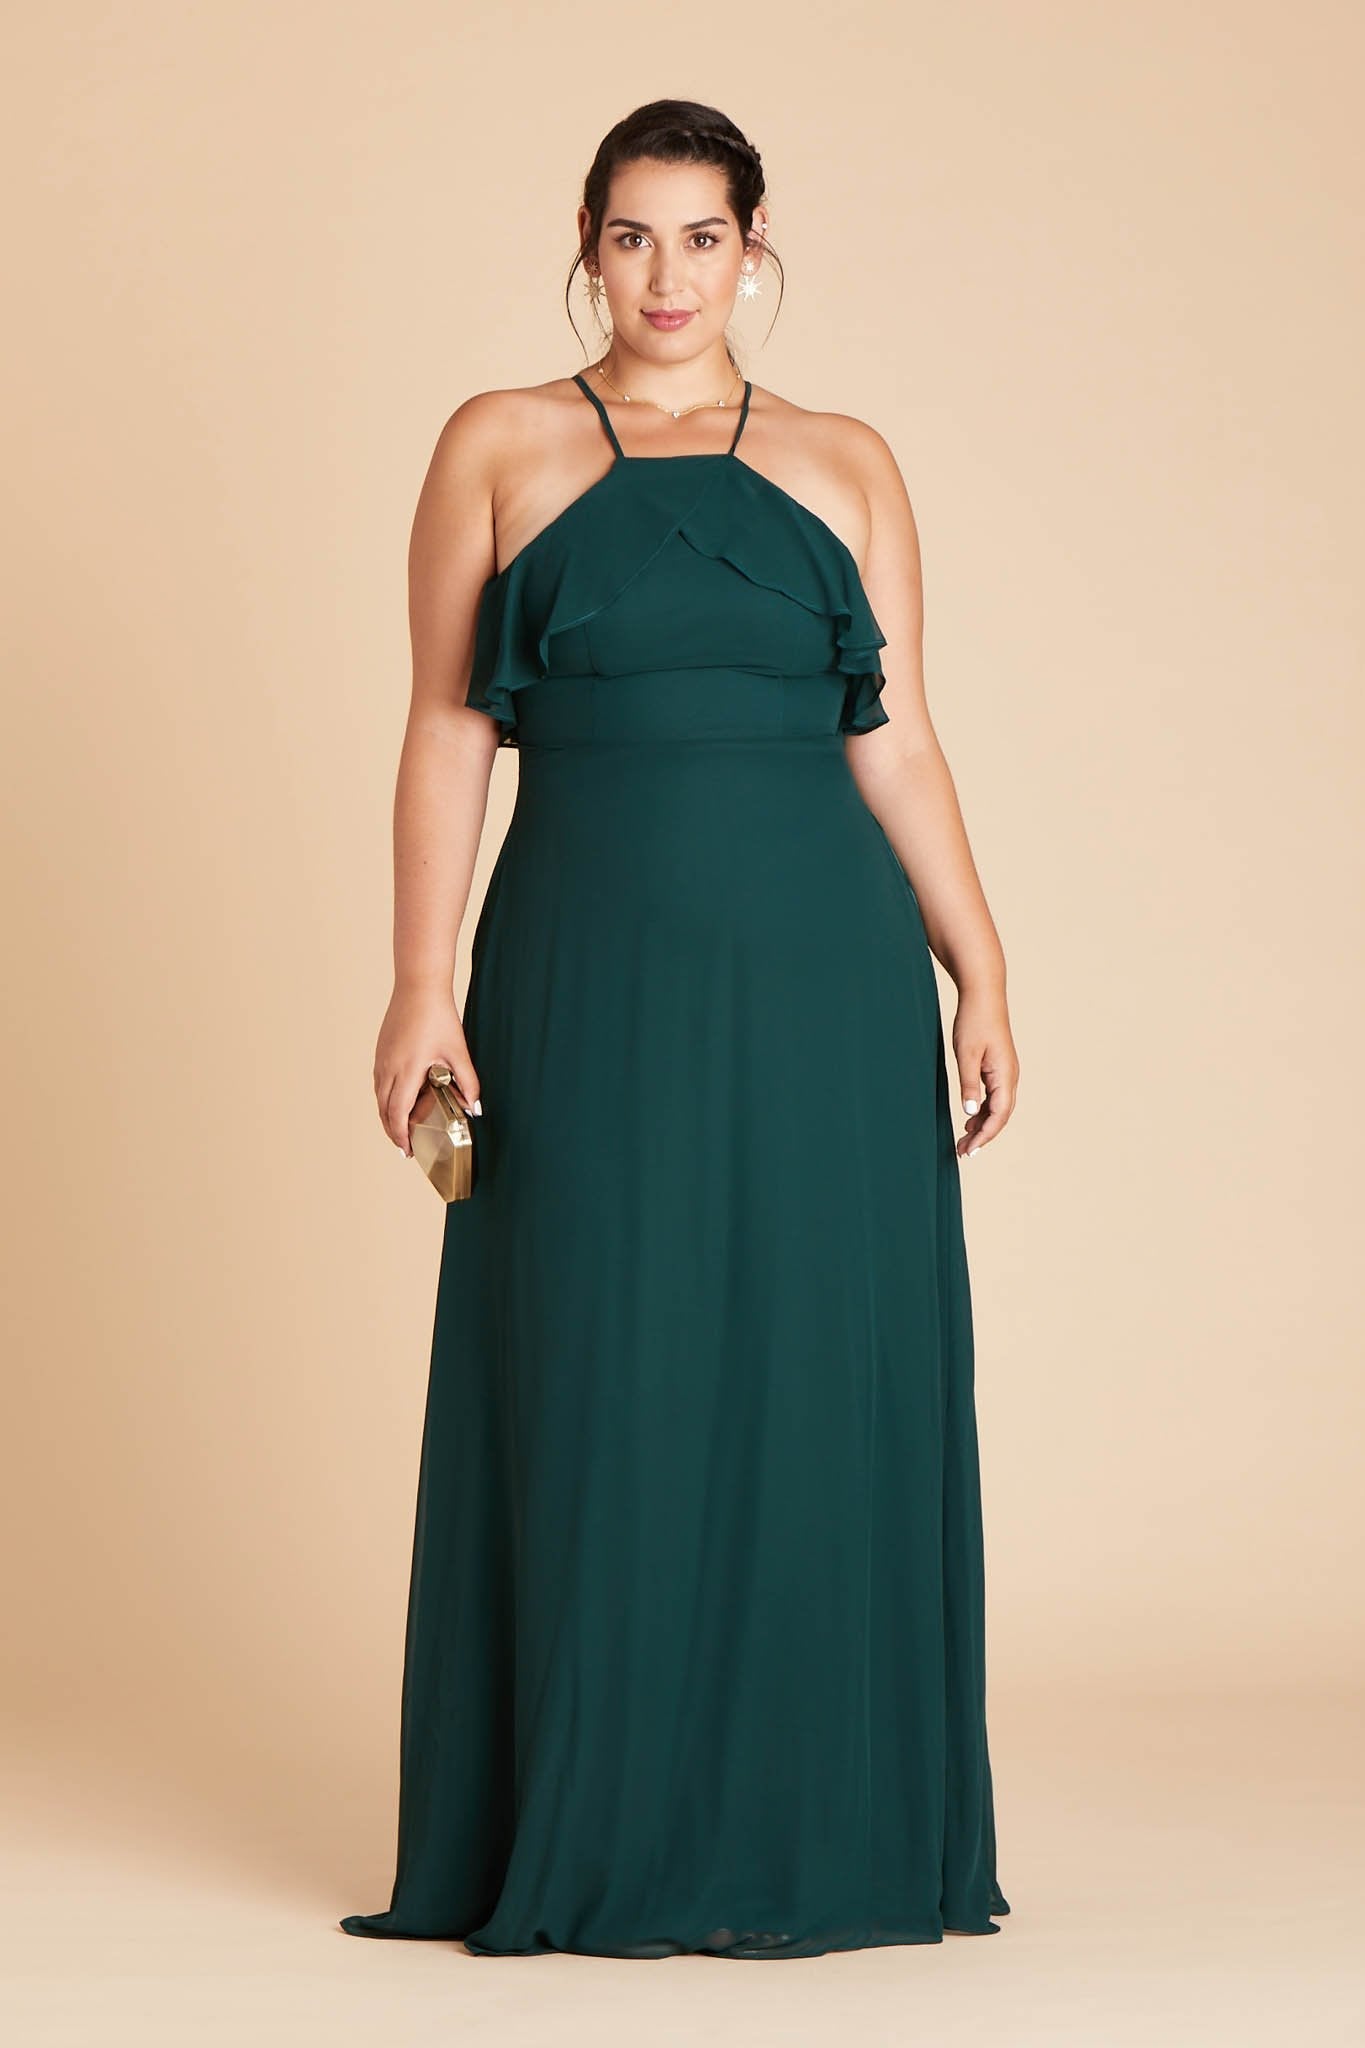 Jules convertible plus size bridesmaid dress in emerald green chiffon by Birdy Grey, front view